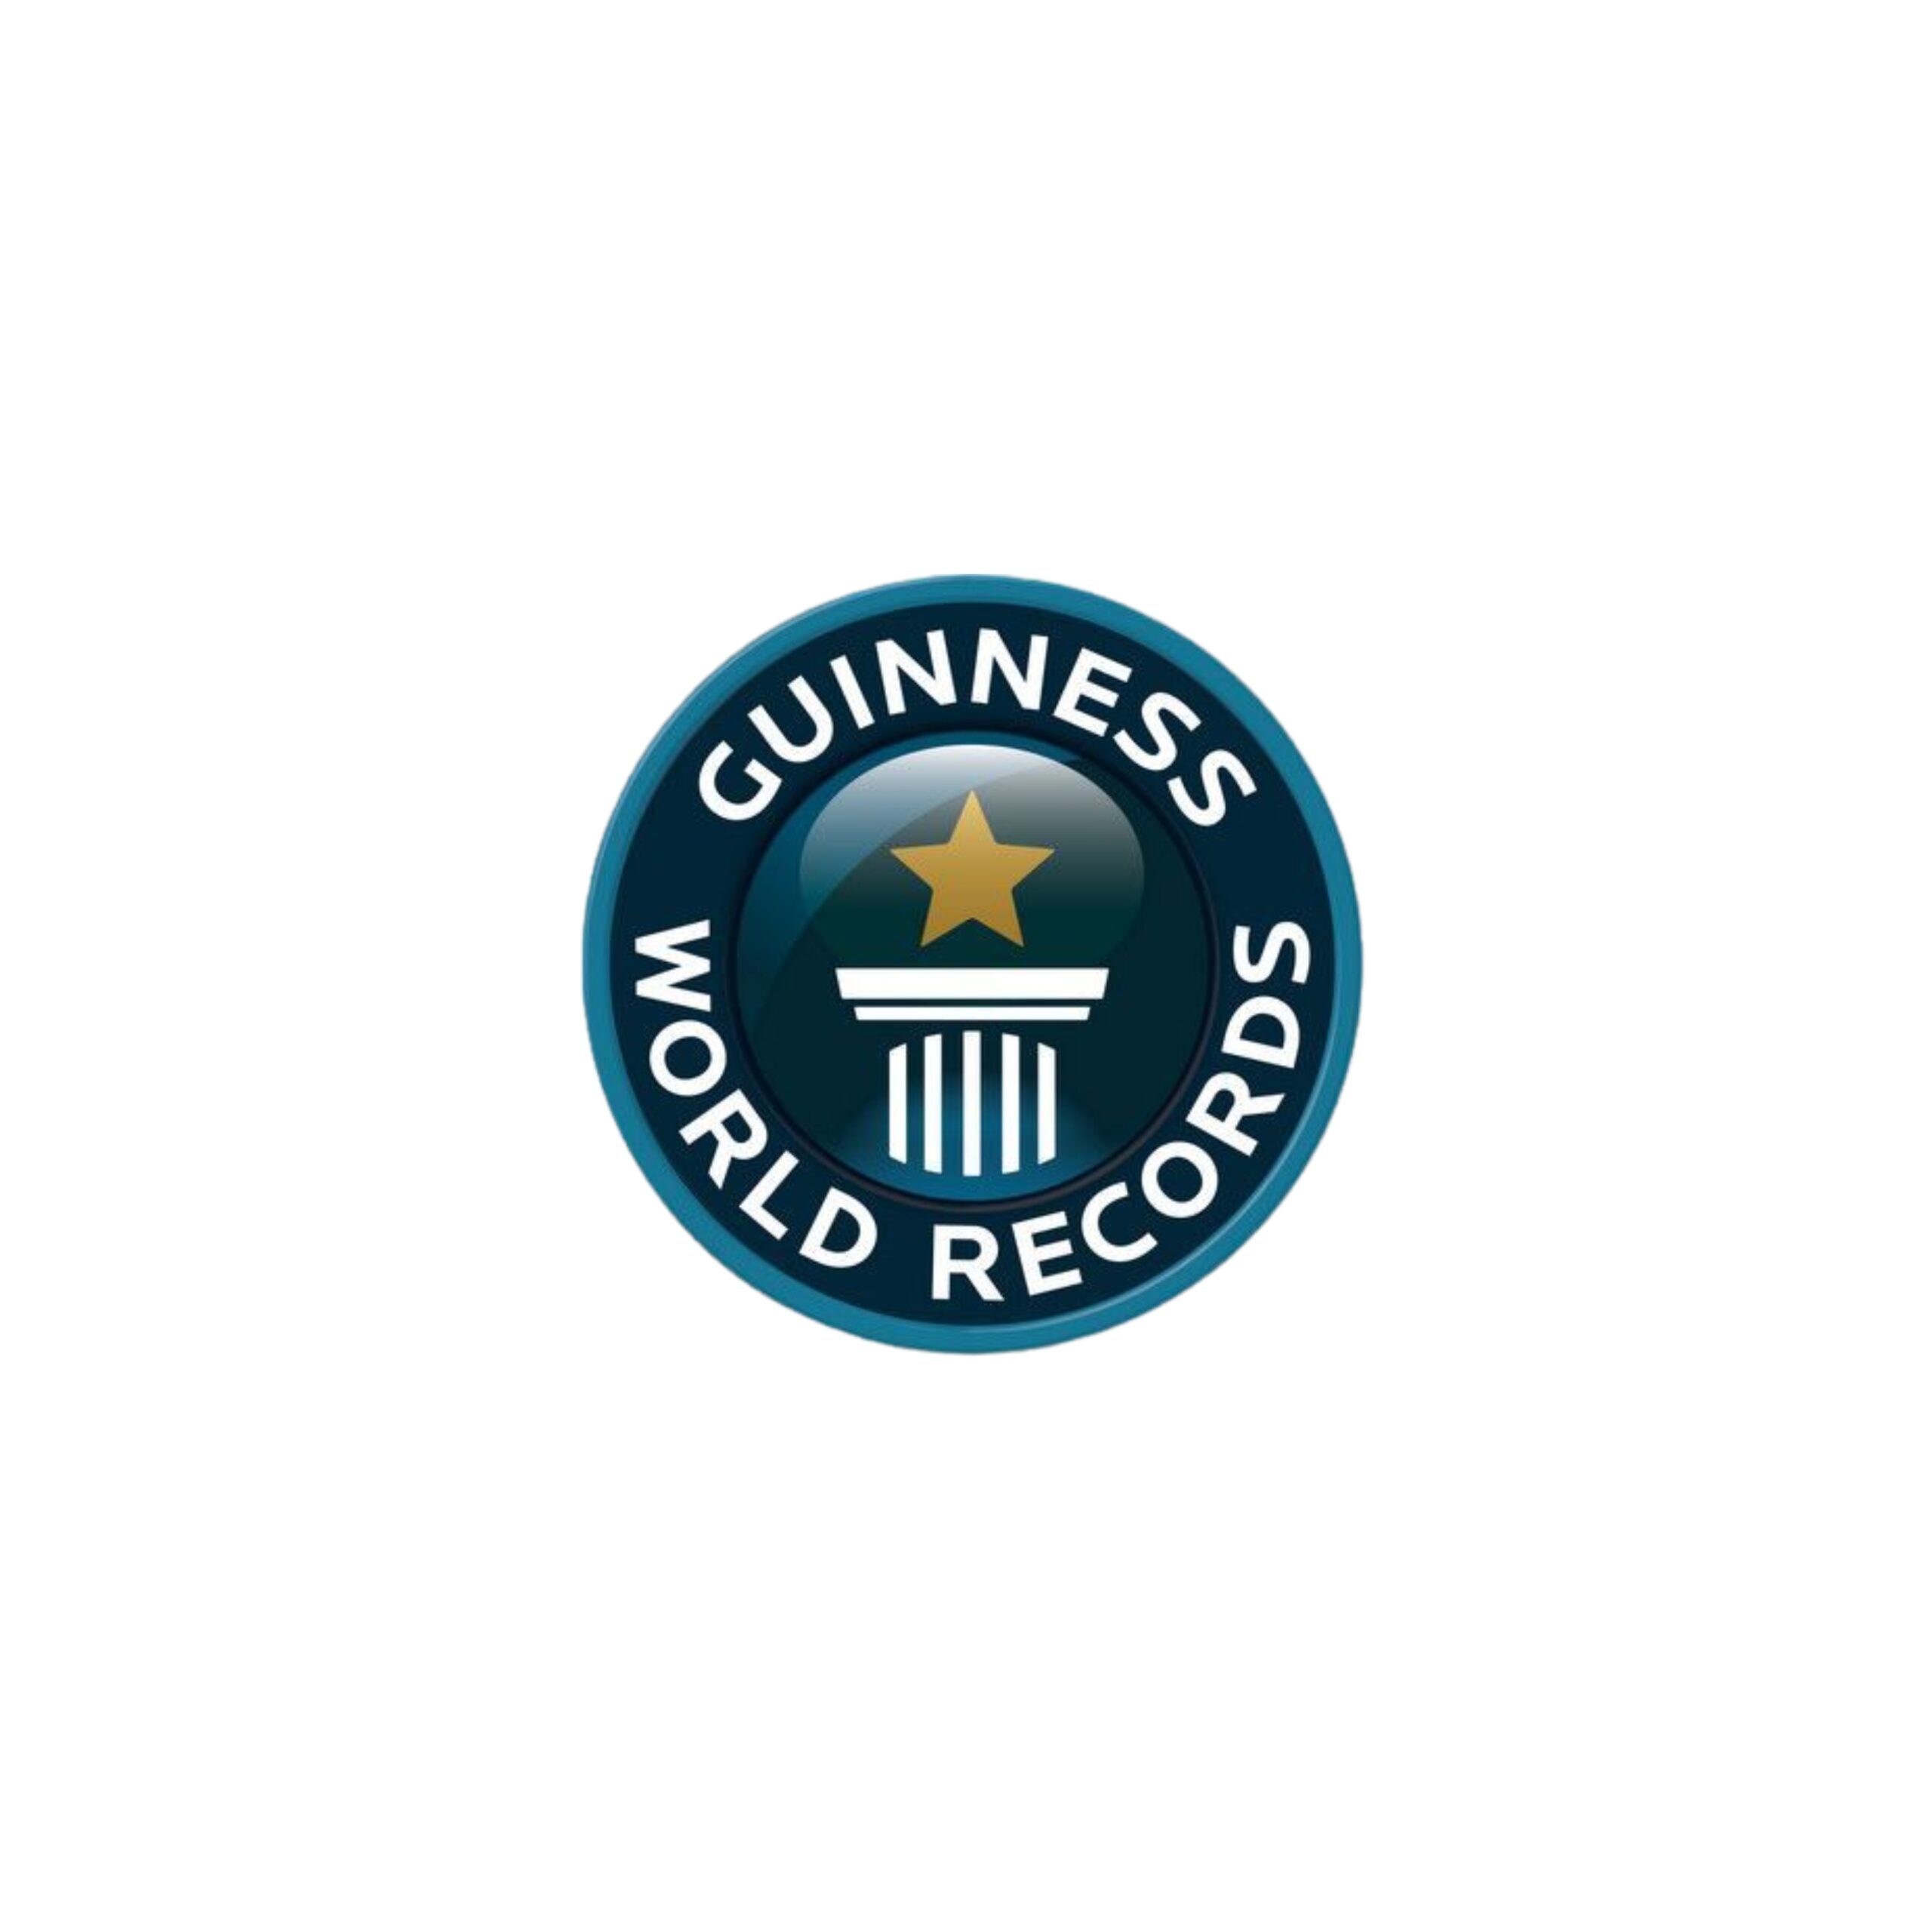 Guidelines | INDIA'S WORLD RECORDS